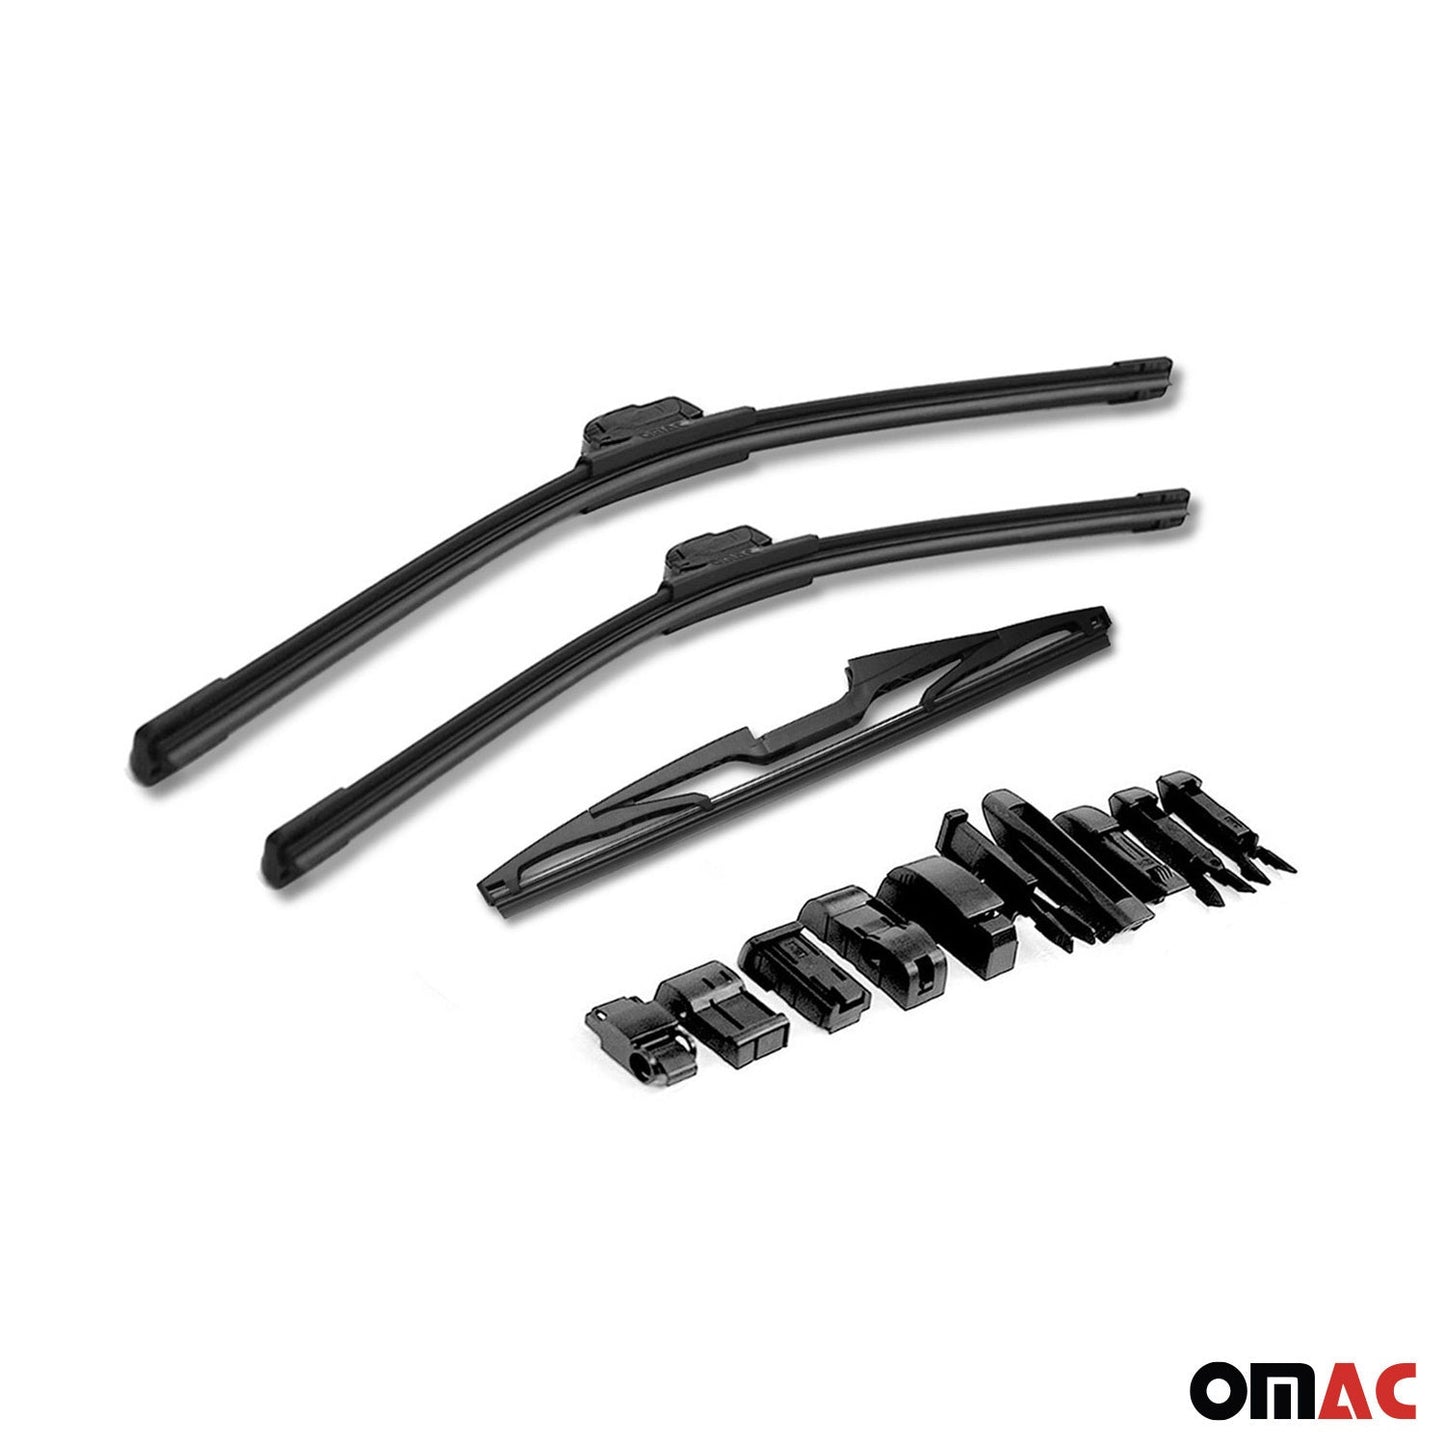 OMAC Front & Rear Windshield Wiper Blades Set for Mazda 3 2010-2013 A050604